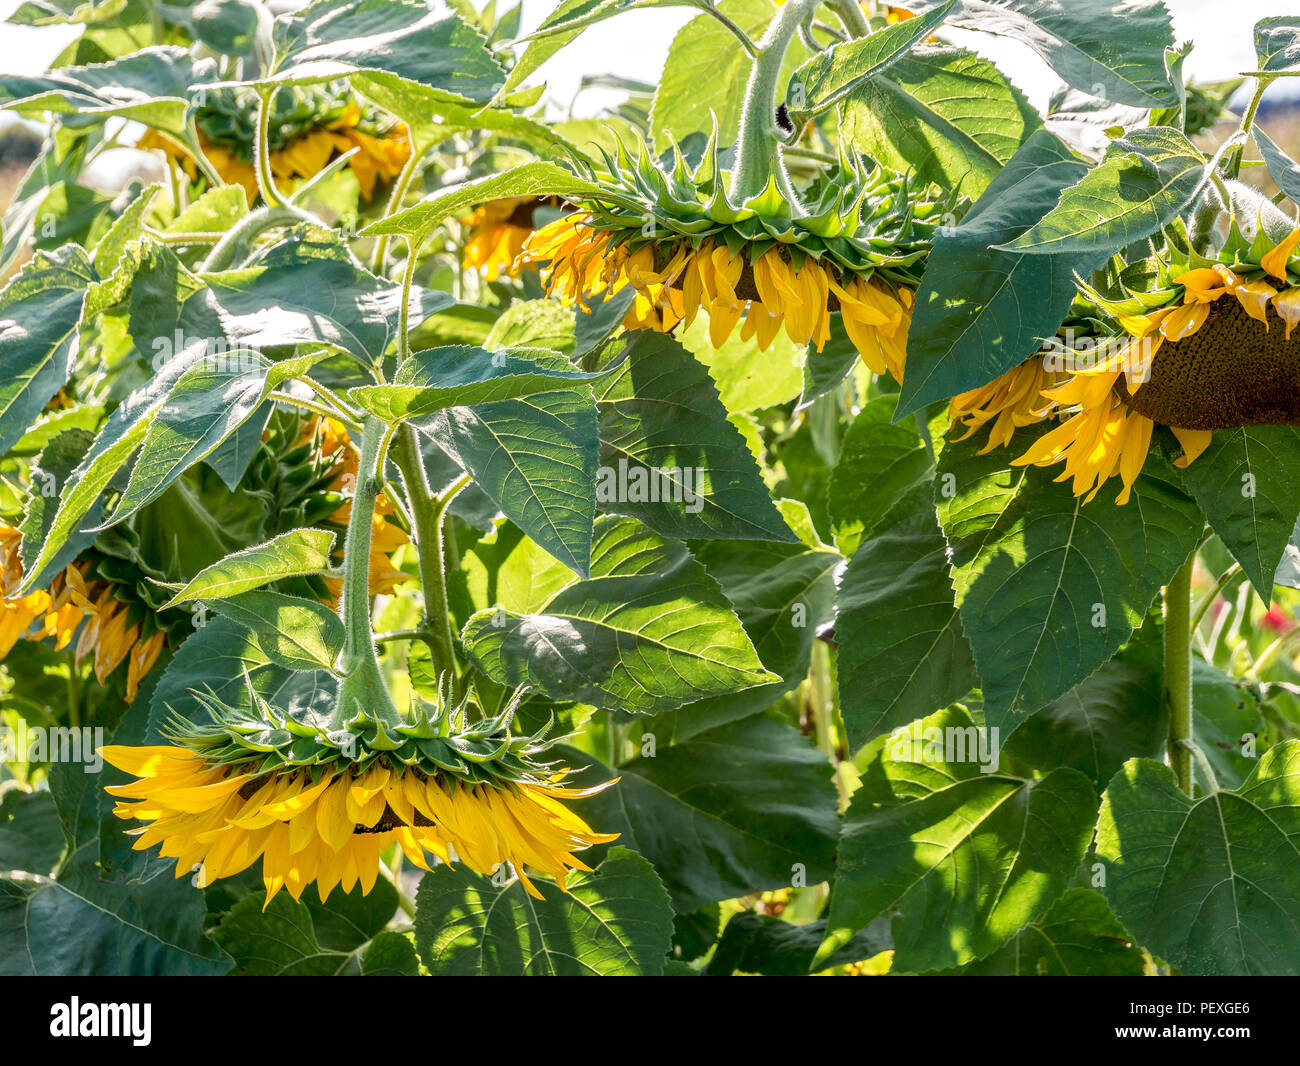 Hanging sun flower heads due to dryness. close up Stock Photo